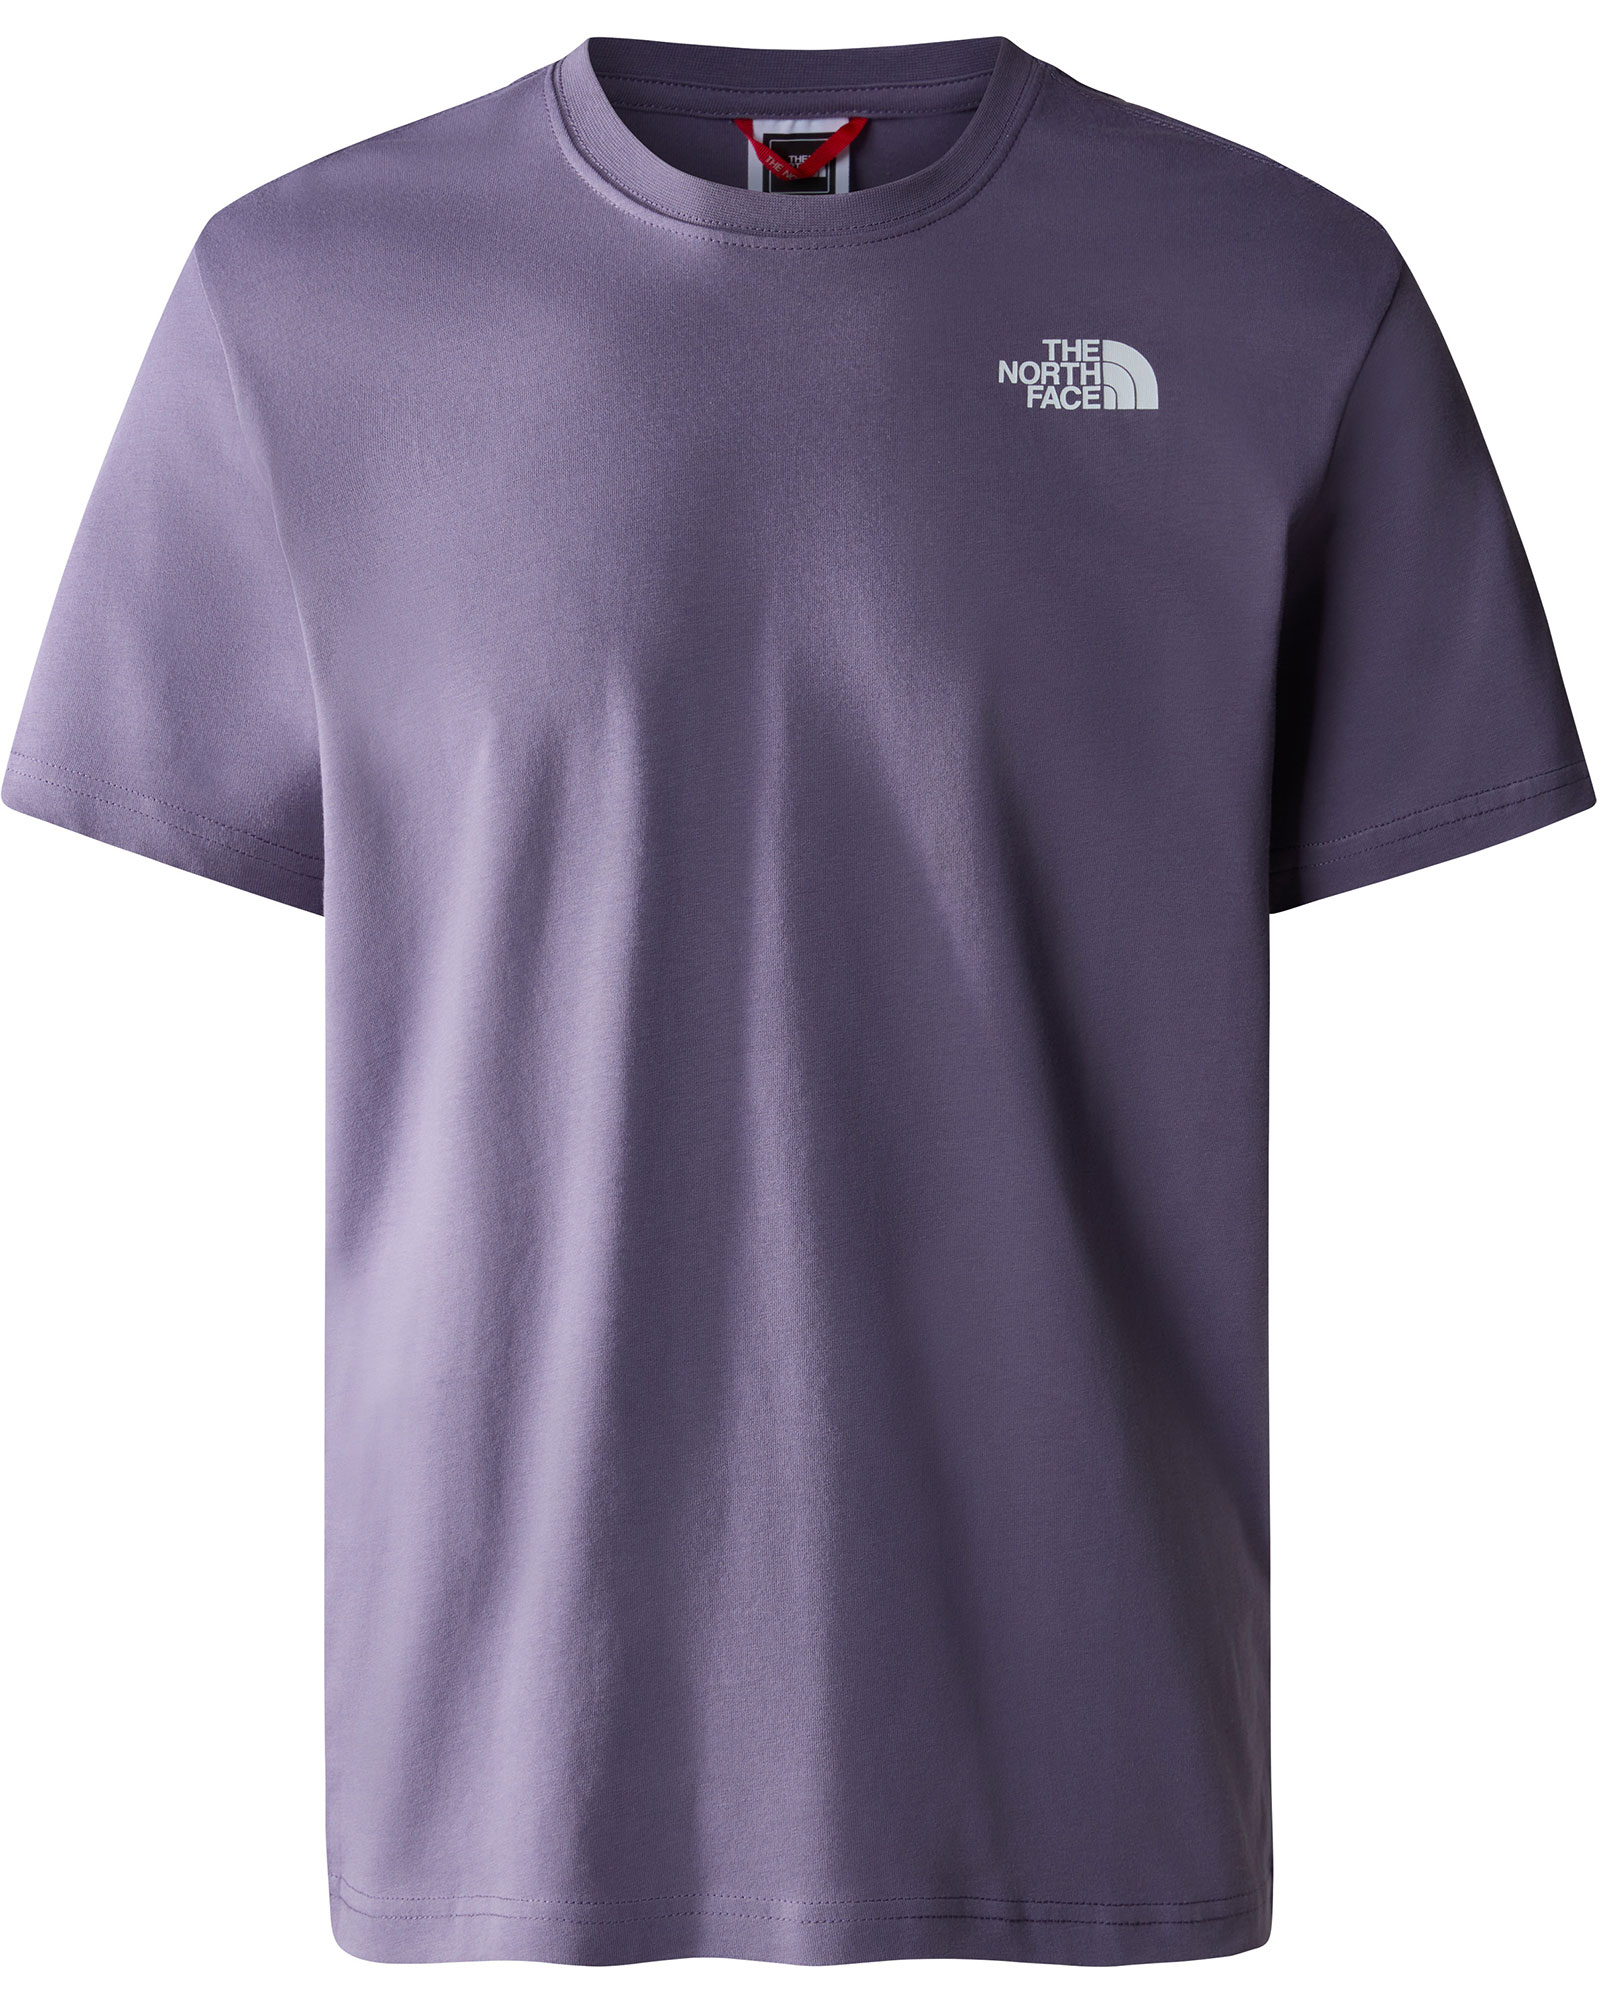 The North Face Red Box Men’s T Shirt - Lunar Slate S